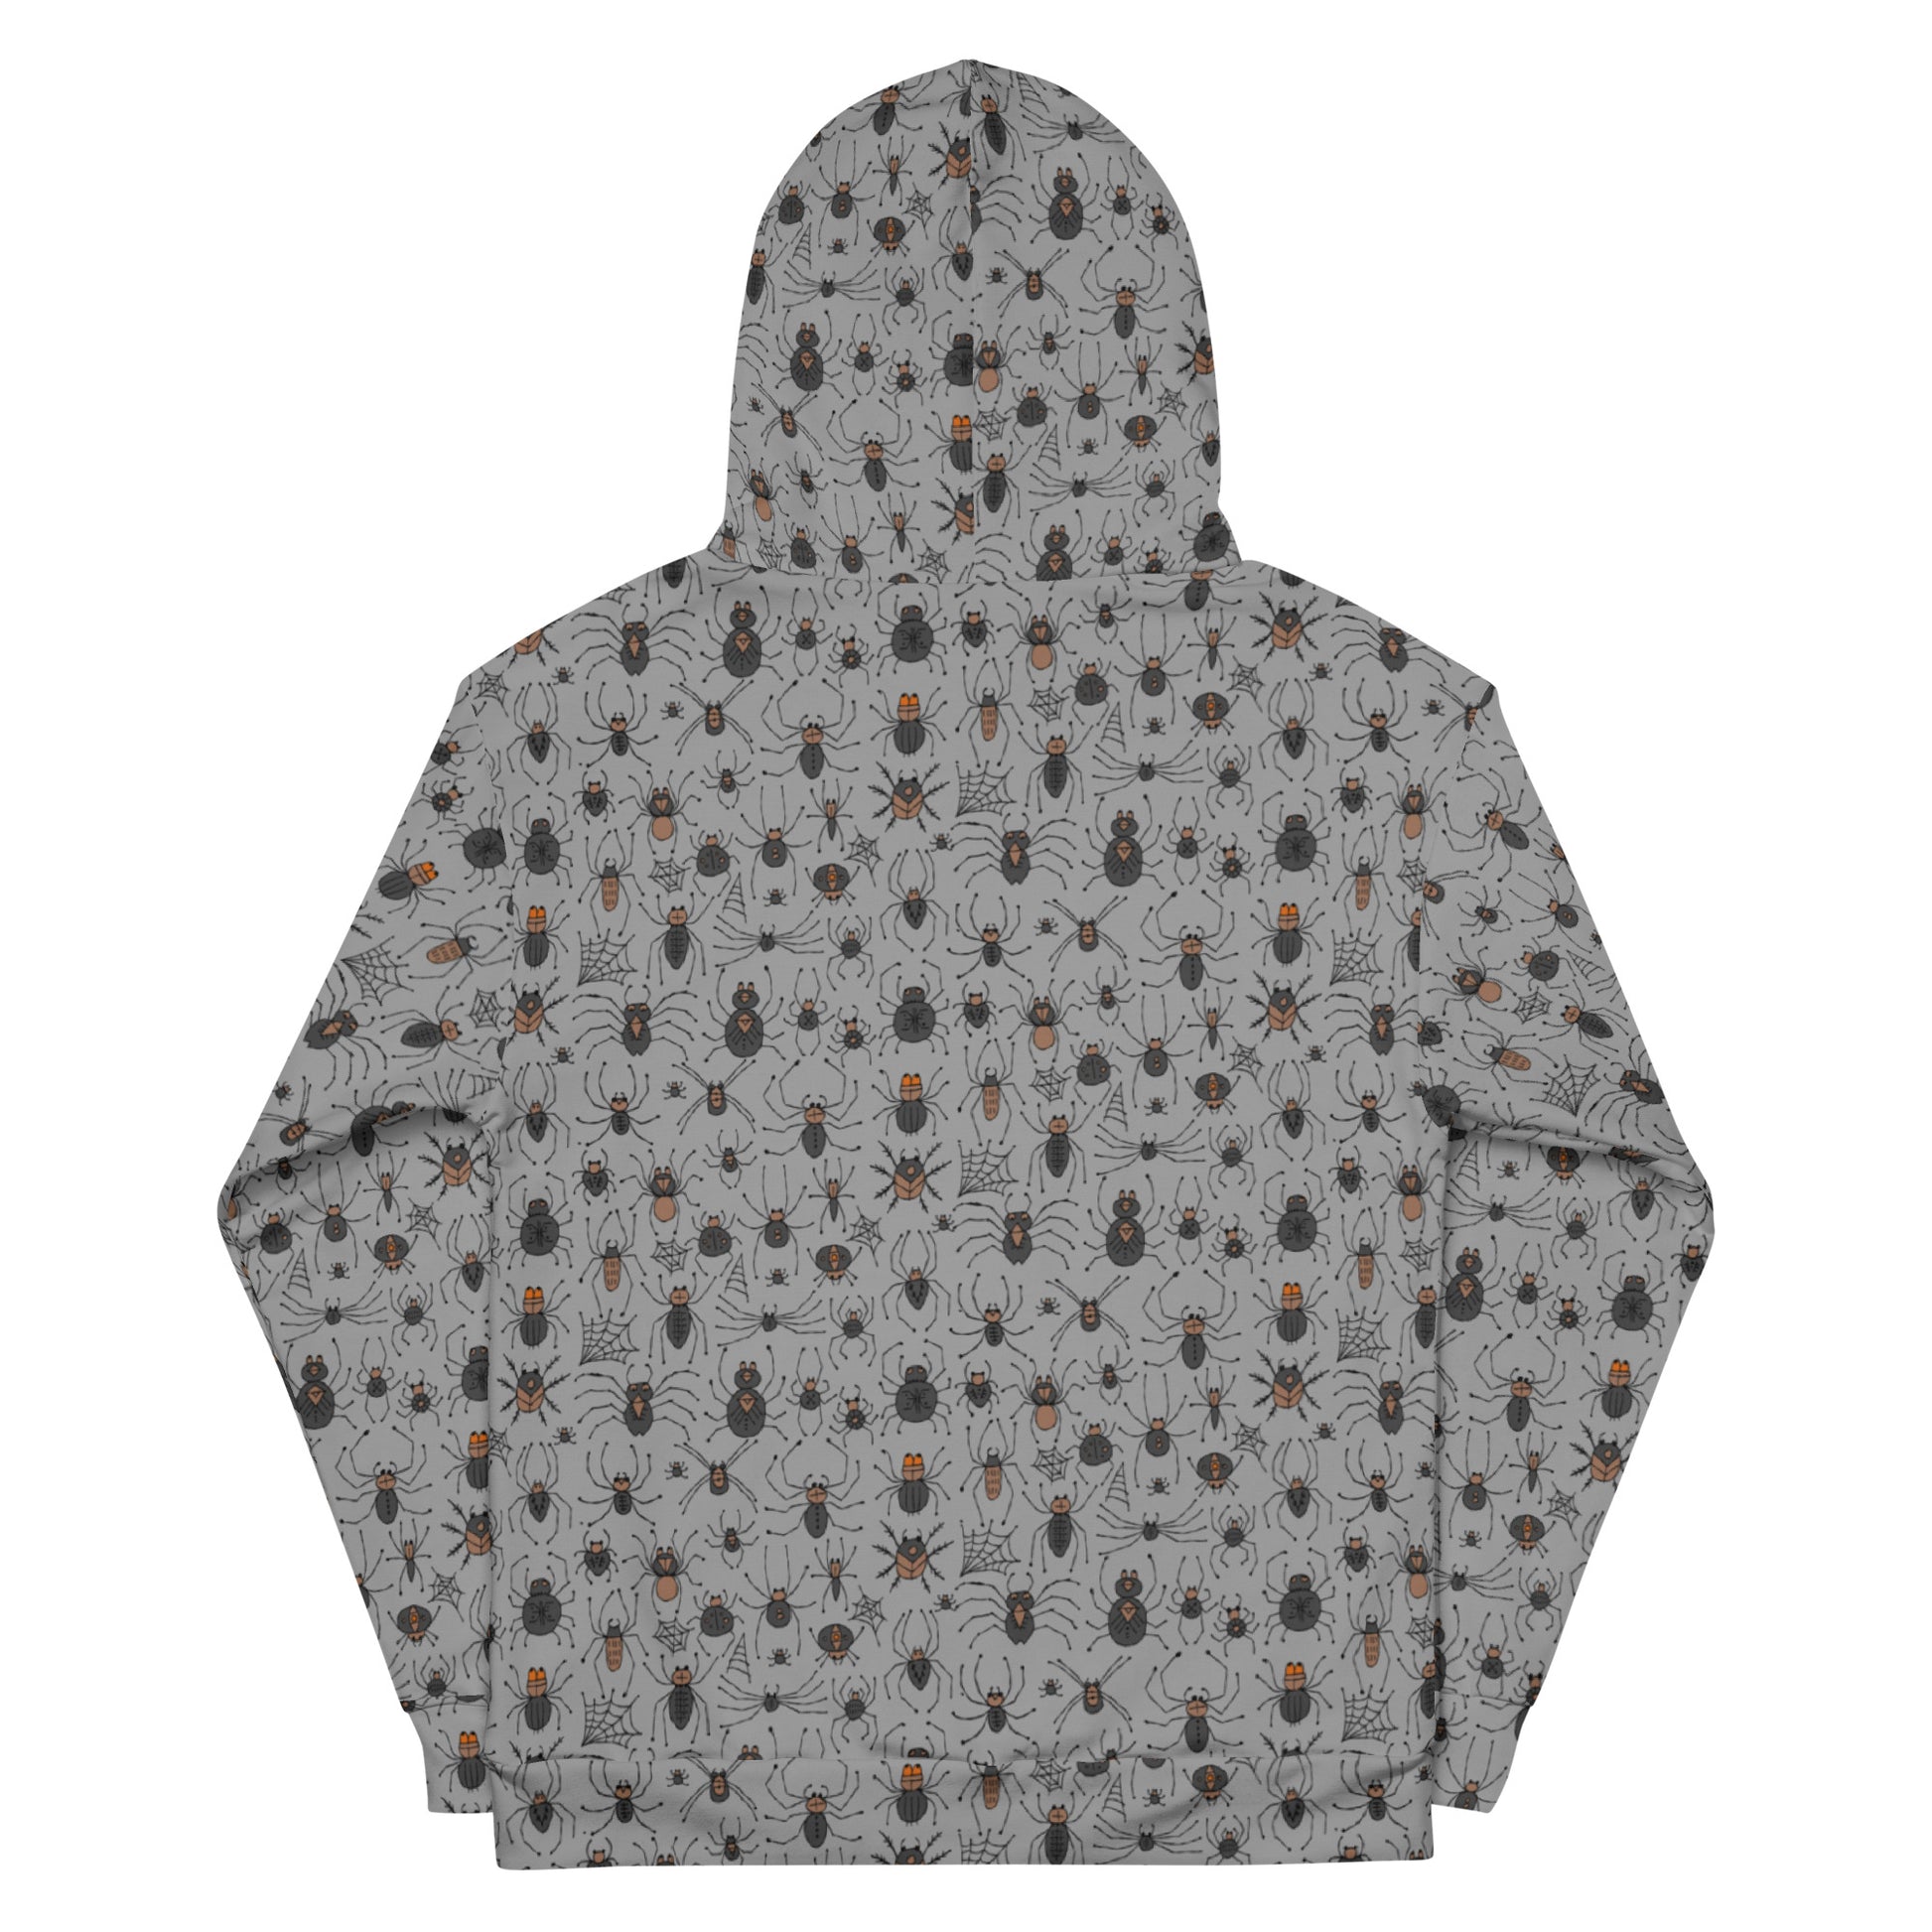 Unisex Hoodie for Arachnology lovers. Black and funny spiders collection on dark grey. Back side